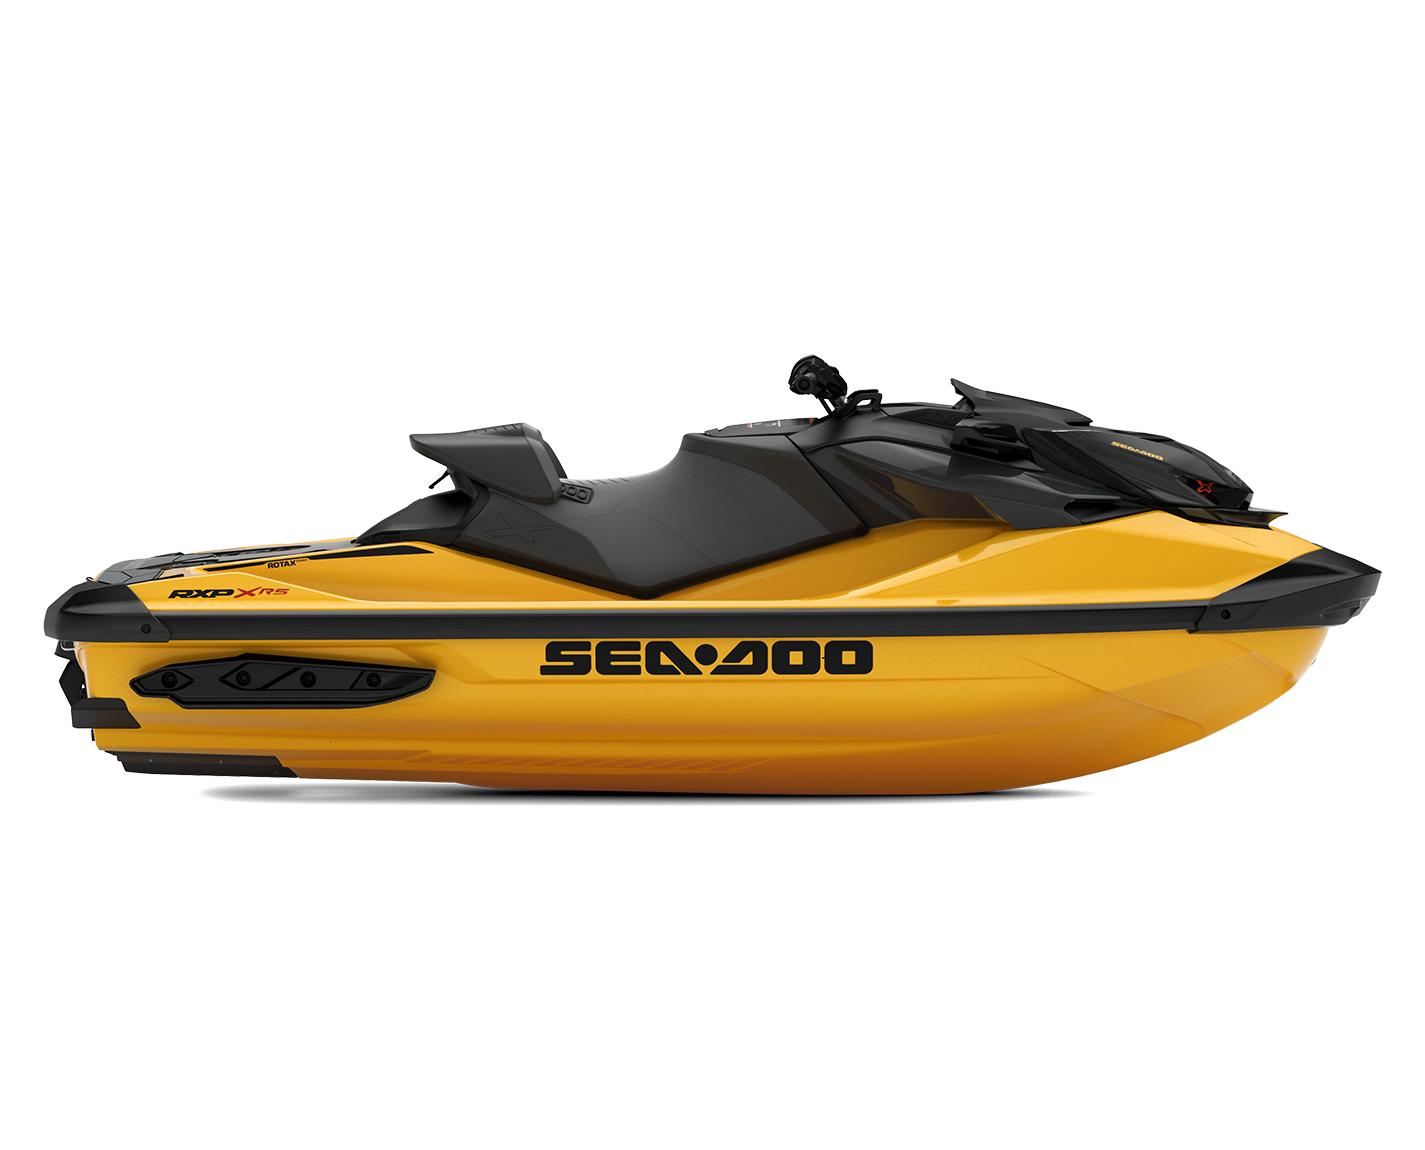 2023 Sea-Doo RXP-X RS 300 - Sound System